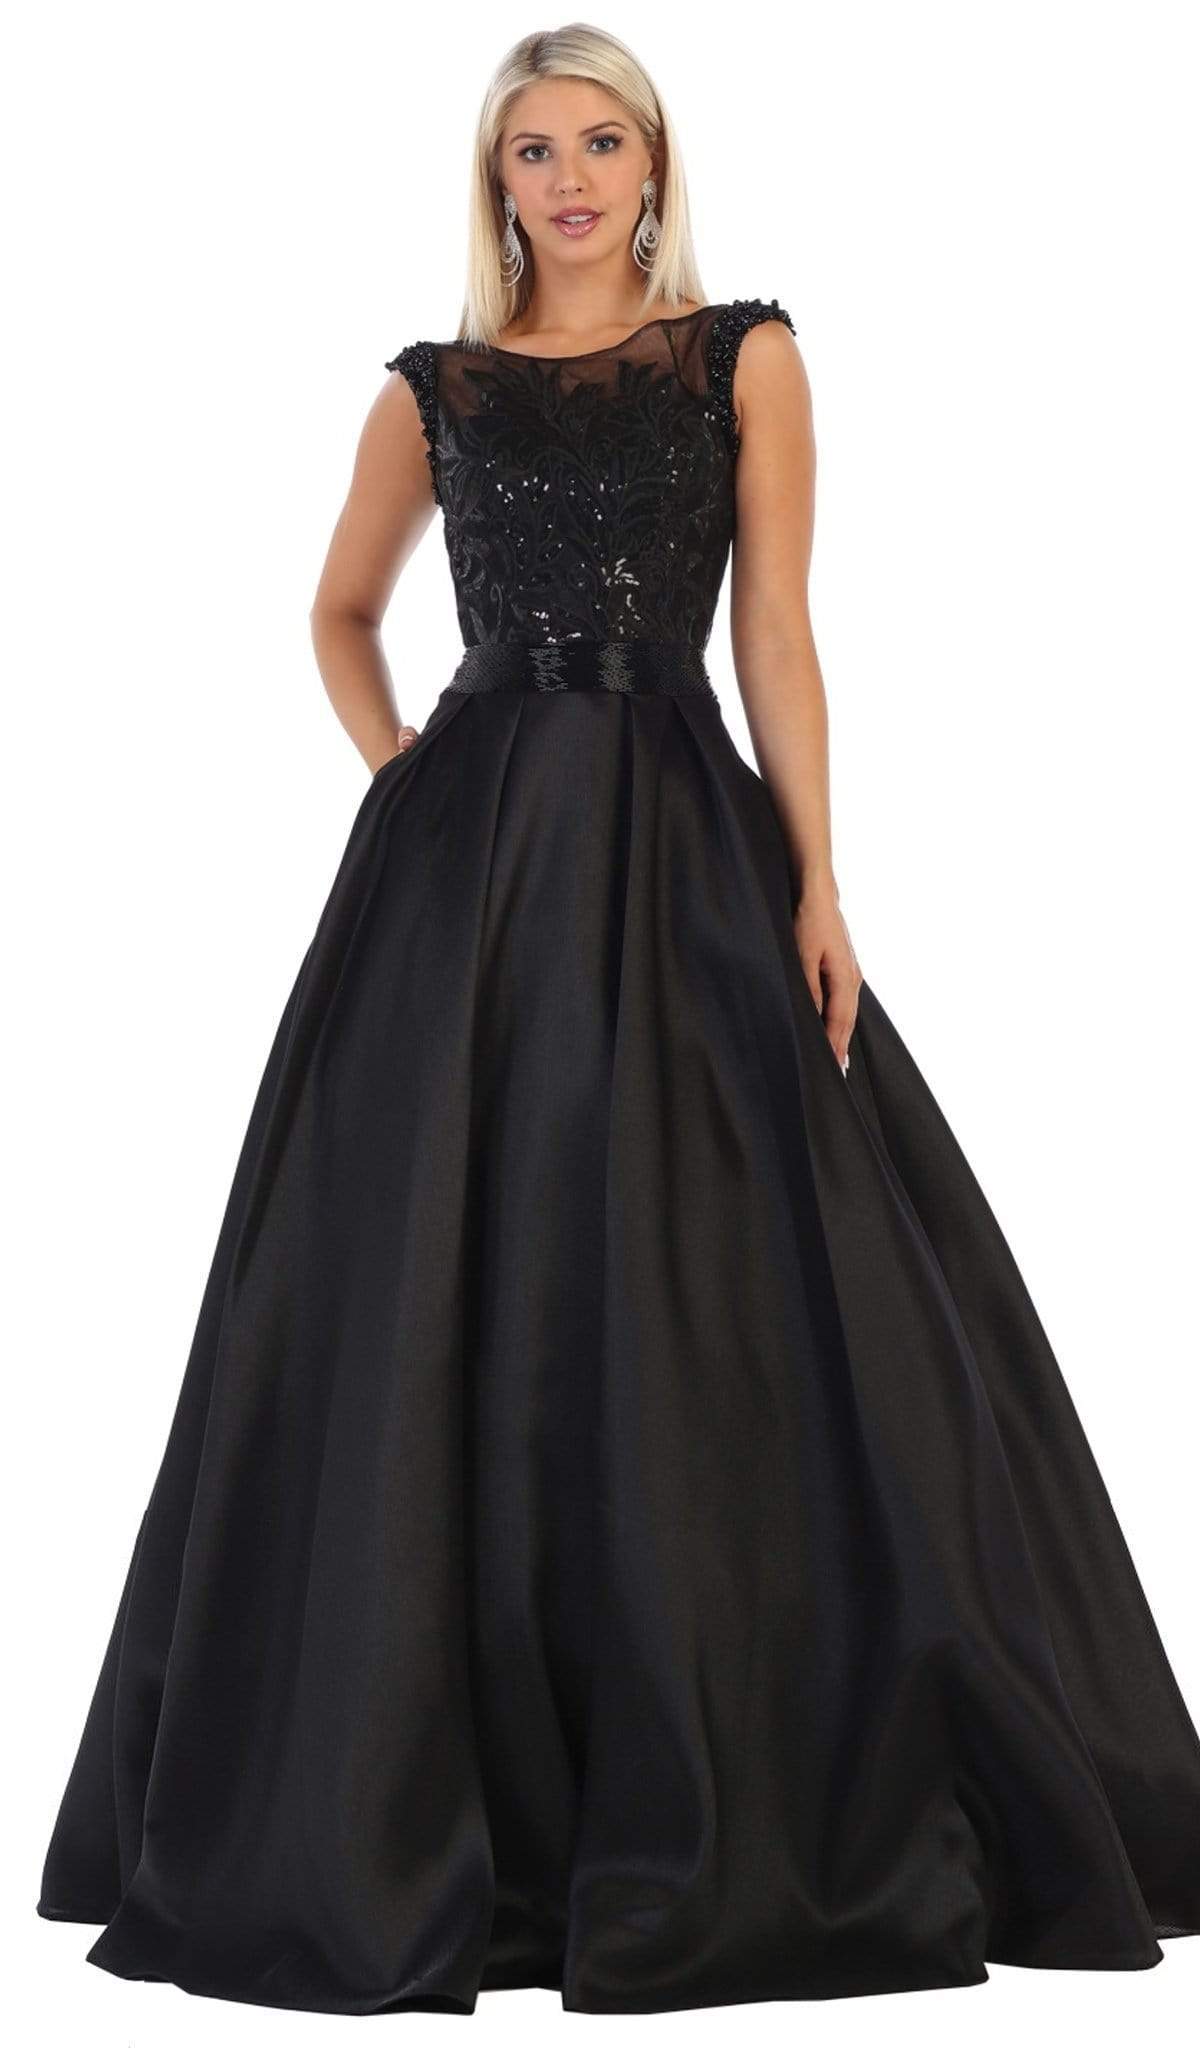 May Queen - RQ7706 Sequin Embroidered Ballgown Ball Gowns 4 / Black